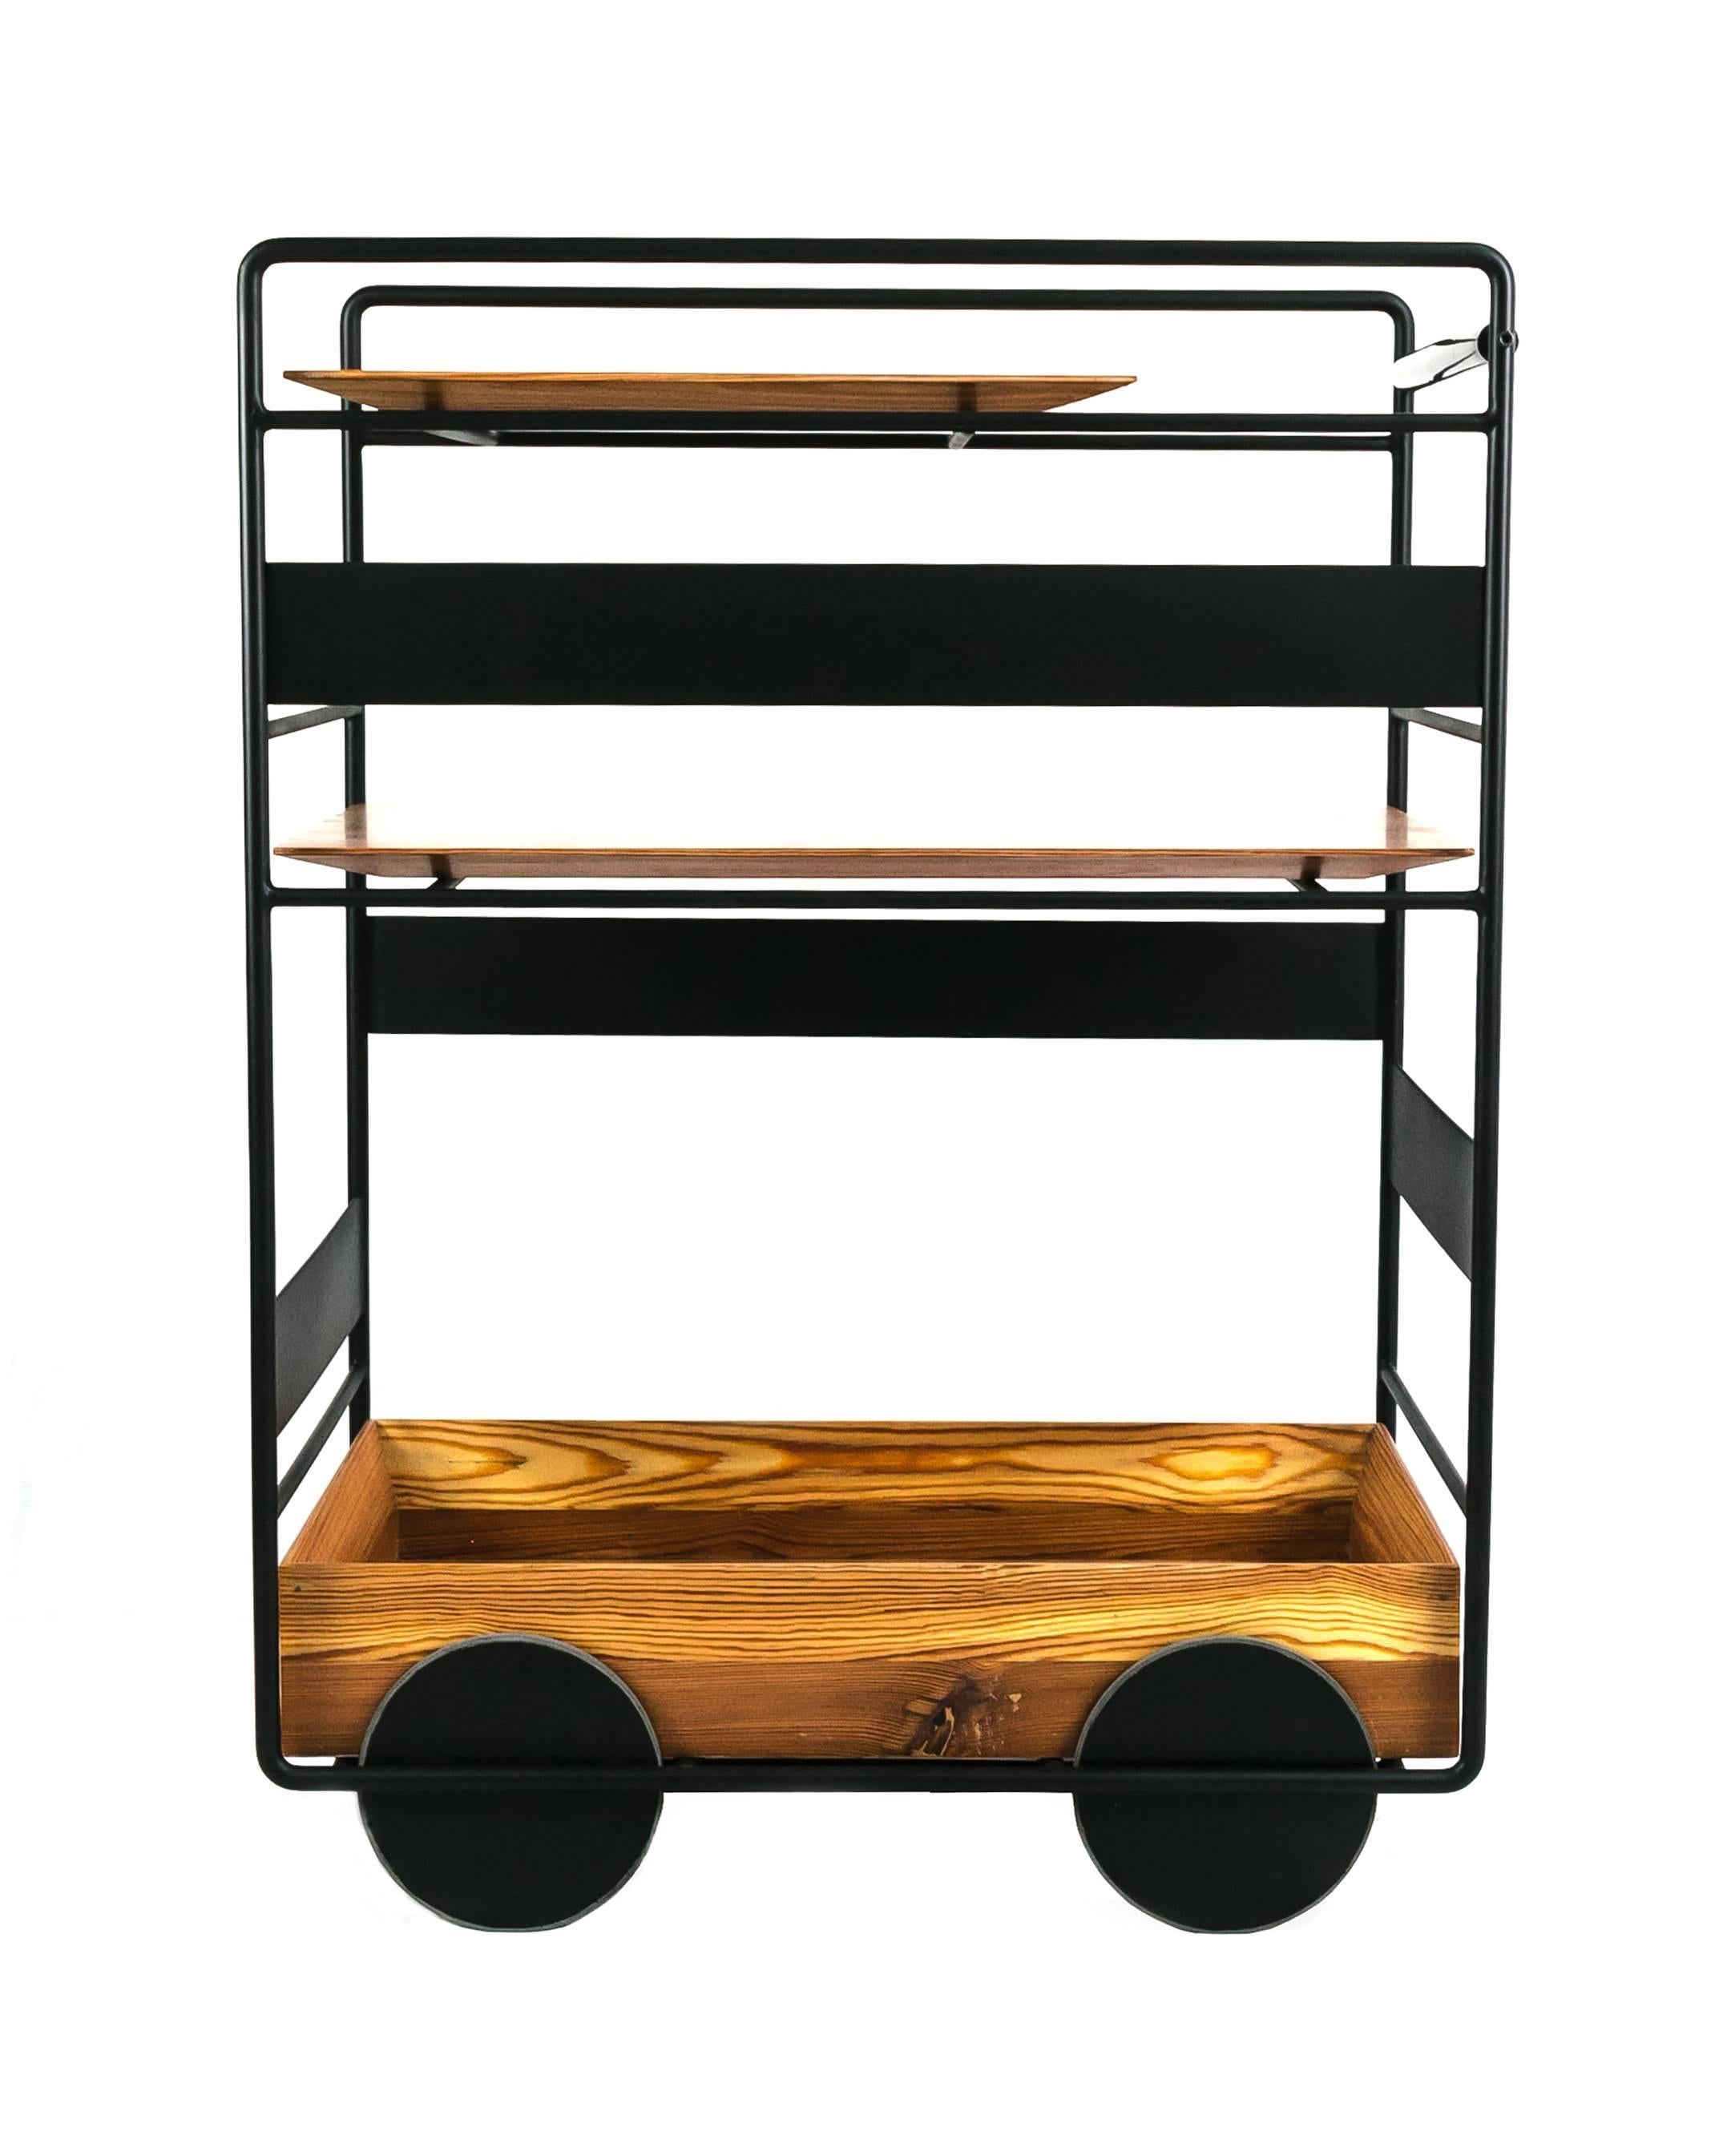 The Ambulante bar trolley (2017) was inspired by the itinerant coffee carts from city of Salvador in Bahia. It can be used as a carriage for drinks, a shelf for books and as support in the kitchen, bathroom or room. Created with the intention to be